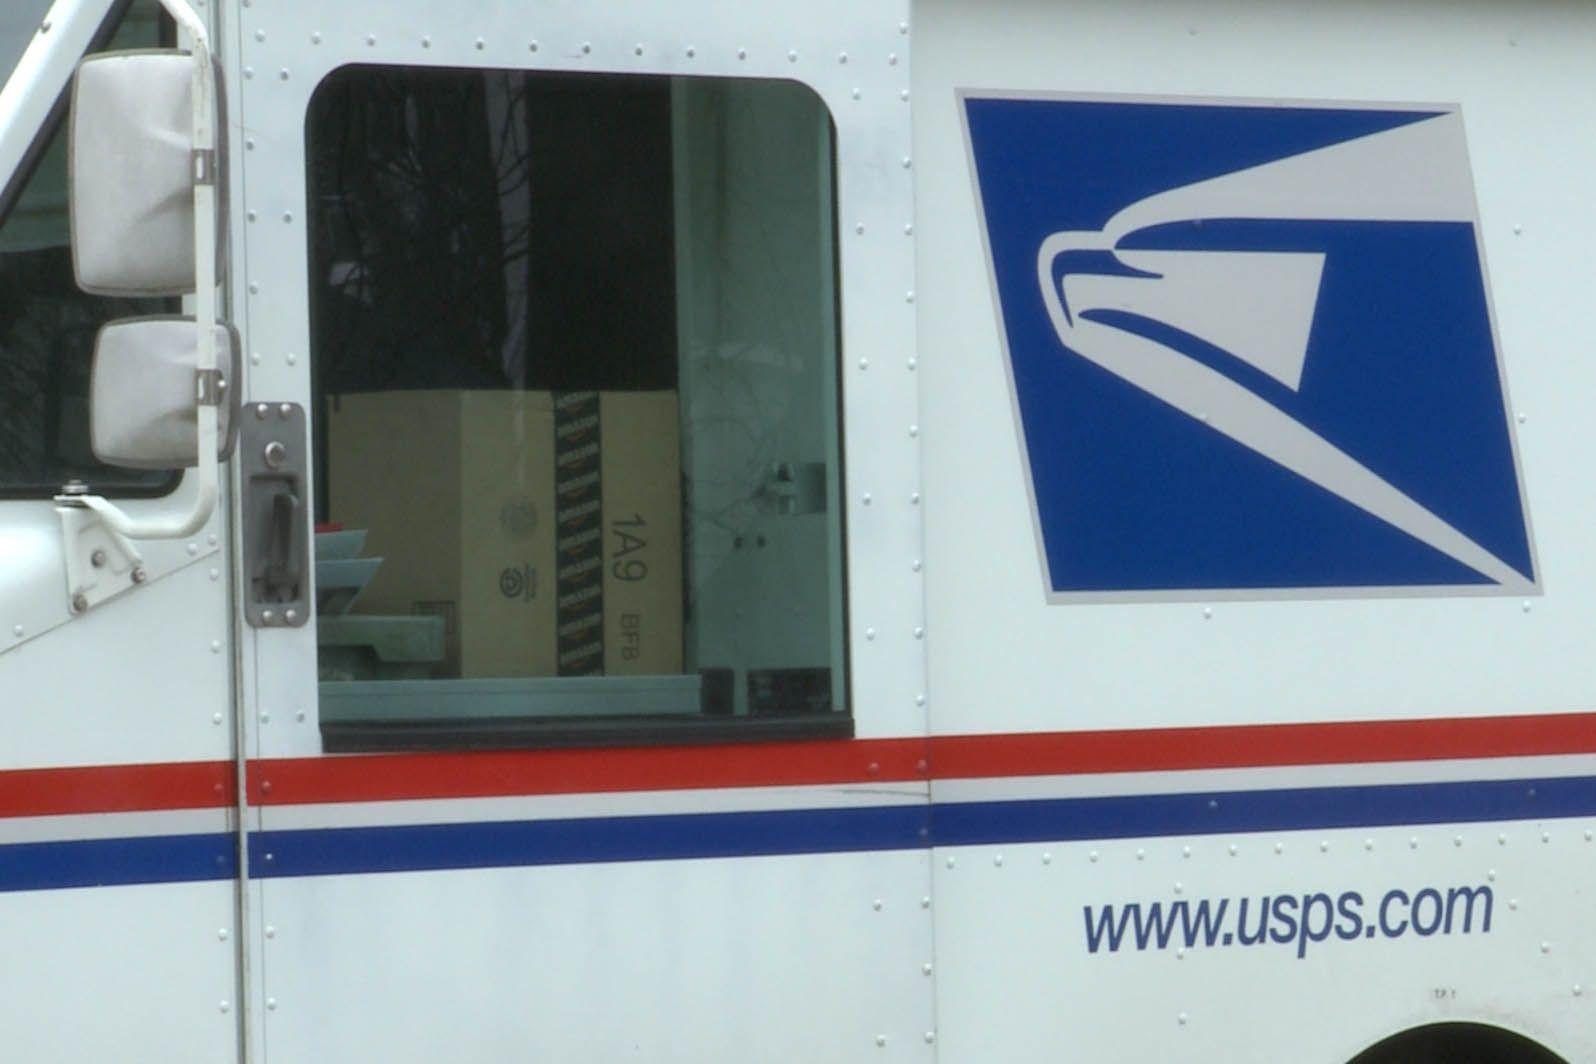 Mail Truck Logo - USPS Planning To Reduce Mail Delivery | News - Indiana Public Media